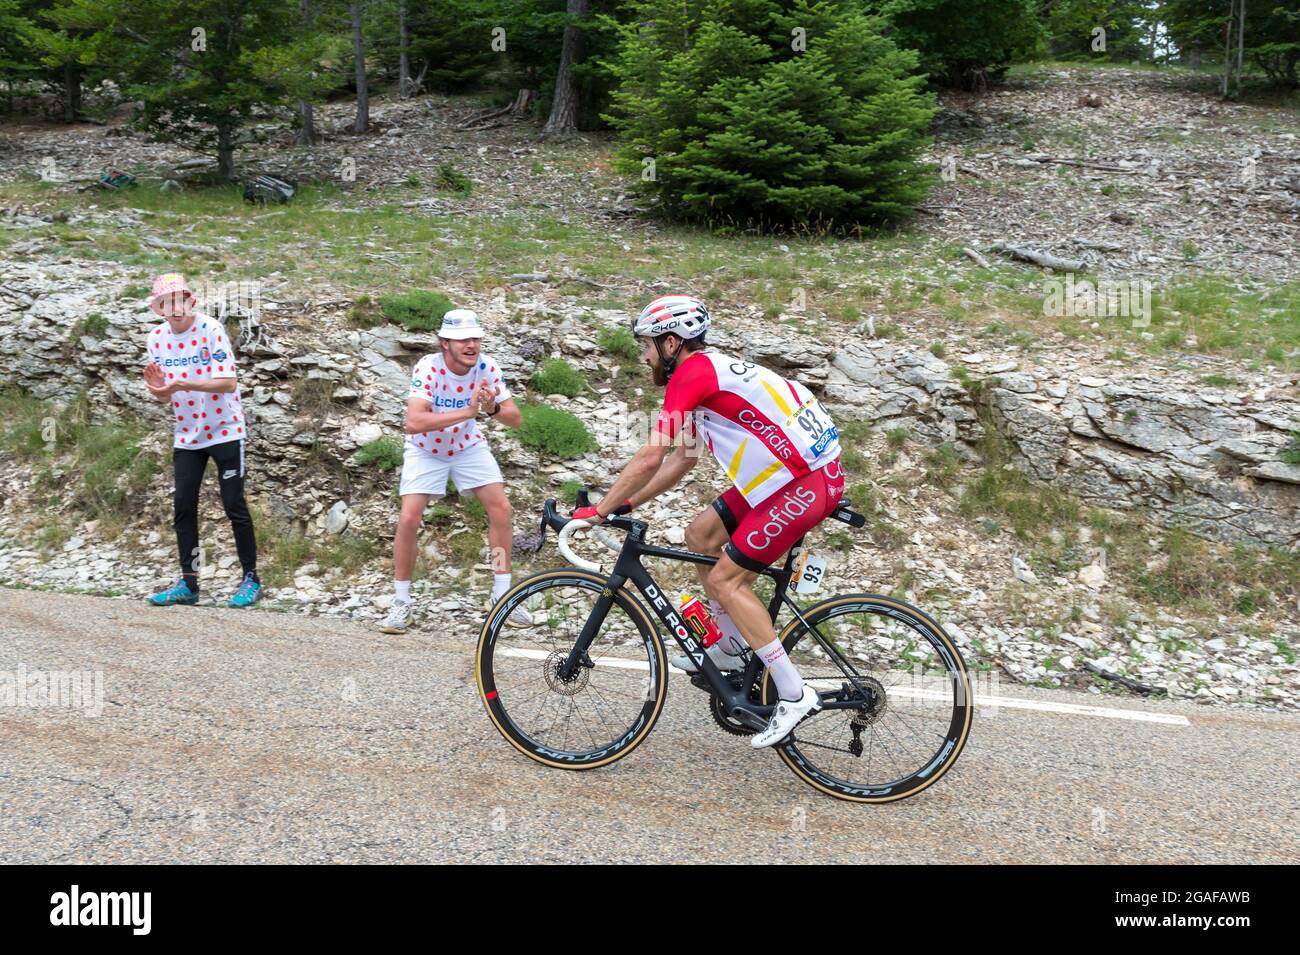 Simon Geschke (team cofidis) in action during the 11th stage of 2021 Tour de France.The 11th stage of the Tour de France 2021 takes place between Sorgues and Malaucene and includes two ascents of Mont-Ventoux . The winner of the stage is Wout van Aert (Jumbo Visma team) and the final winner of the general classification of the 2021 Tour de France is the Slovenian rider of the UAE Team Emirates Tadej Pogacar. Stock Photo